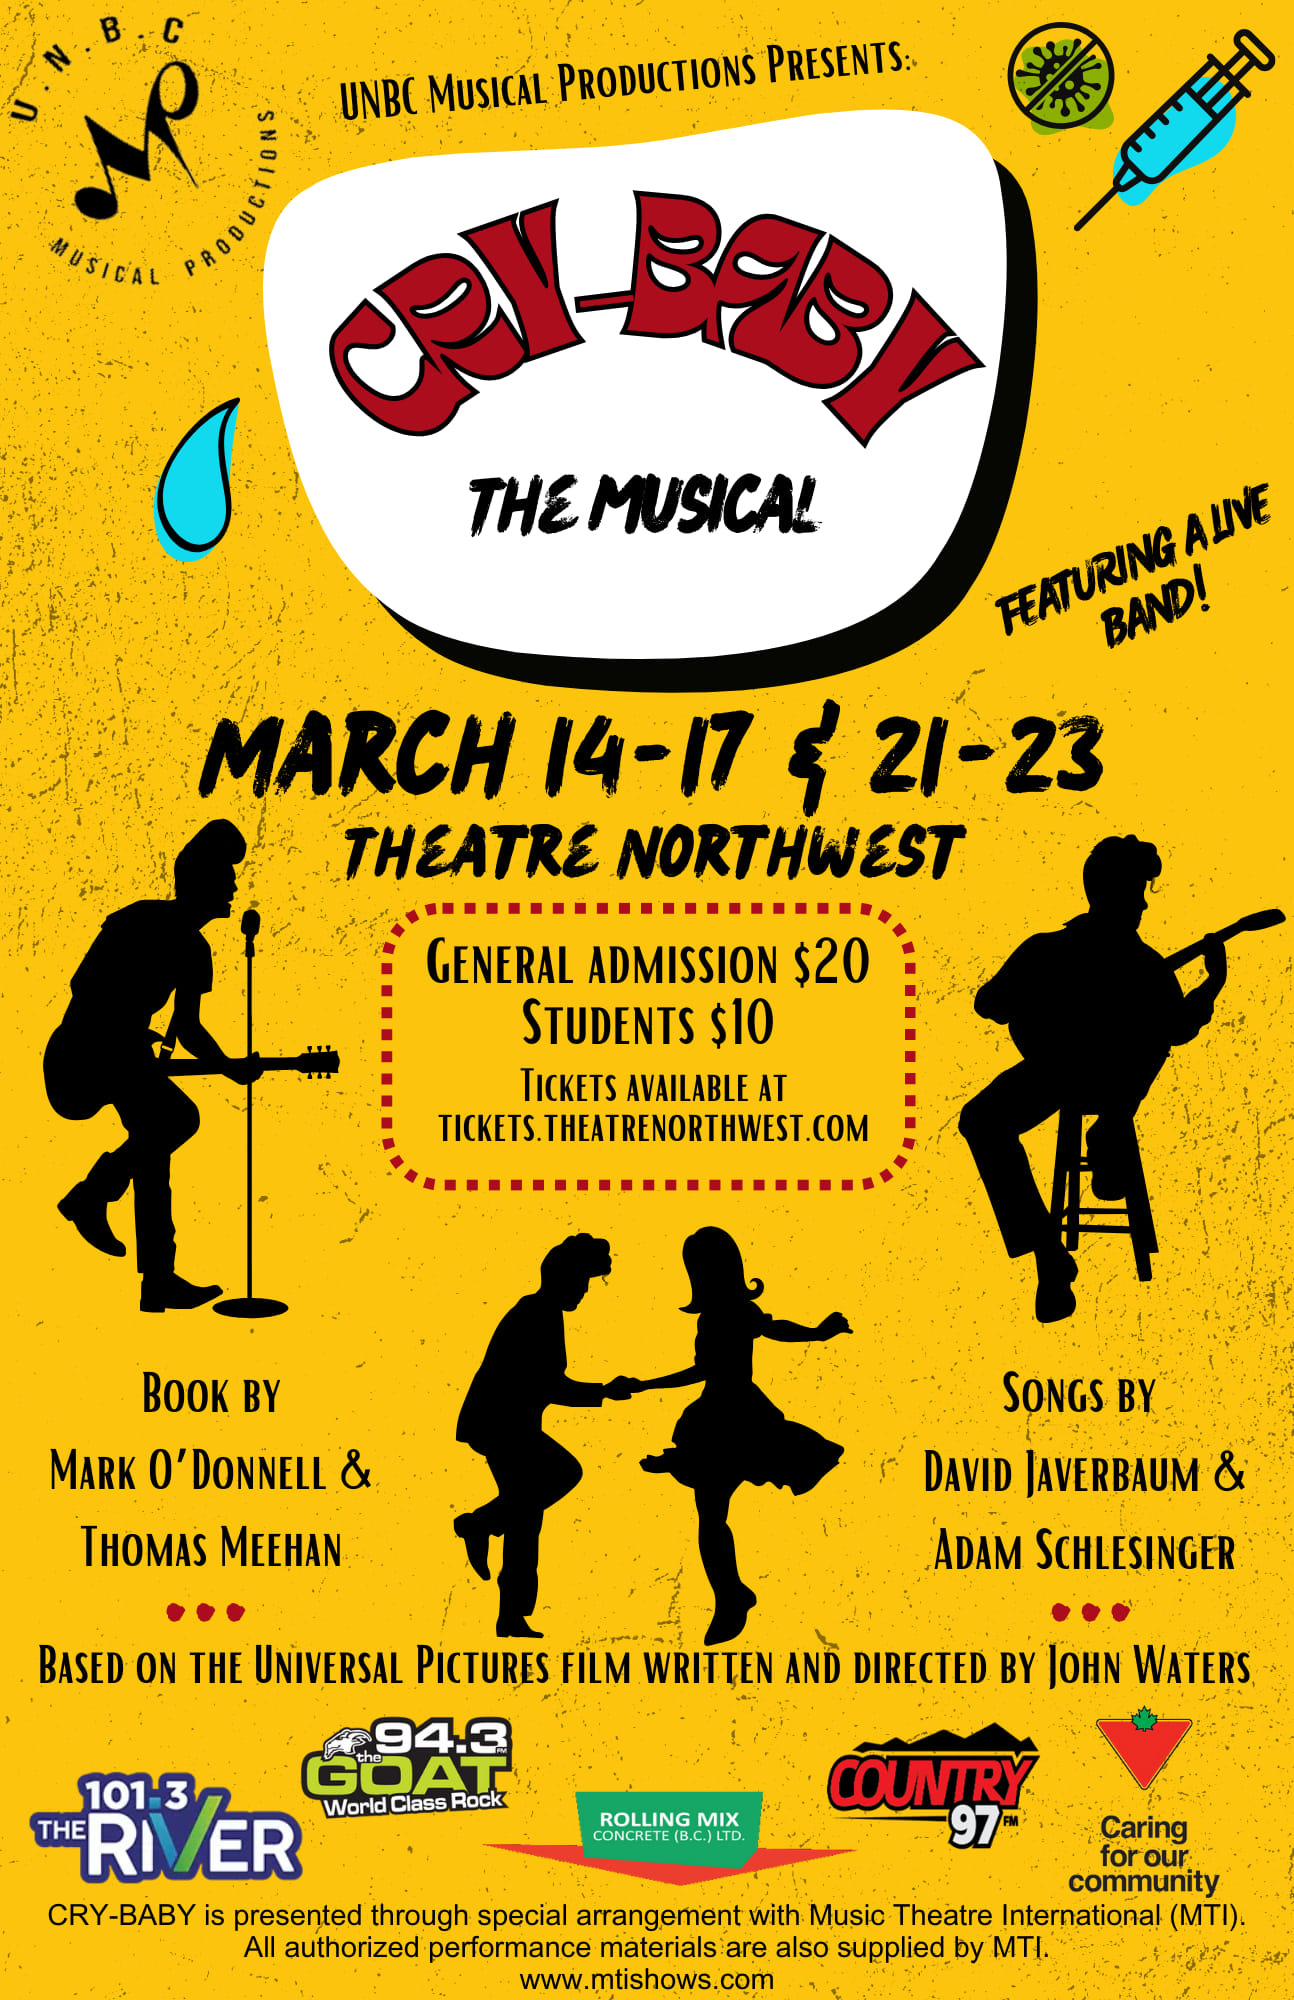 May be an image of text that says 'SE UNBC MUSICAL PRODUCTIONS PRESENTS: MUSICAL PATN CRI-BAB THEMUSICAL FEATURING FRATURINBALINE ALIVE BAND! MARCH 14-17 ኝ 21-23 THEATRE NORTHWEST GENERAL ADMISSION $20 STUDENTS $10 TICKETS AVAILABLE AT TICKETS.THEATRENORTHWEST.COM BOok BY MARK O'DONNELL & THOMAS MEEHAN 14 SONGS BY DAVID JAVERBAUM & ADAM SCHLESINGER ROLLING BASED ON THE UNIVERSAL PICTURES FILM WRITTEN AND DIRECTED BY JOHN WATERS 94.3 101. GOAT COUNTRY THE RIVER World community CRY-BABY is presented through special arrangement with Music Theatre International (MTI). authorized performance materials are also supplied by MTI. Caring'